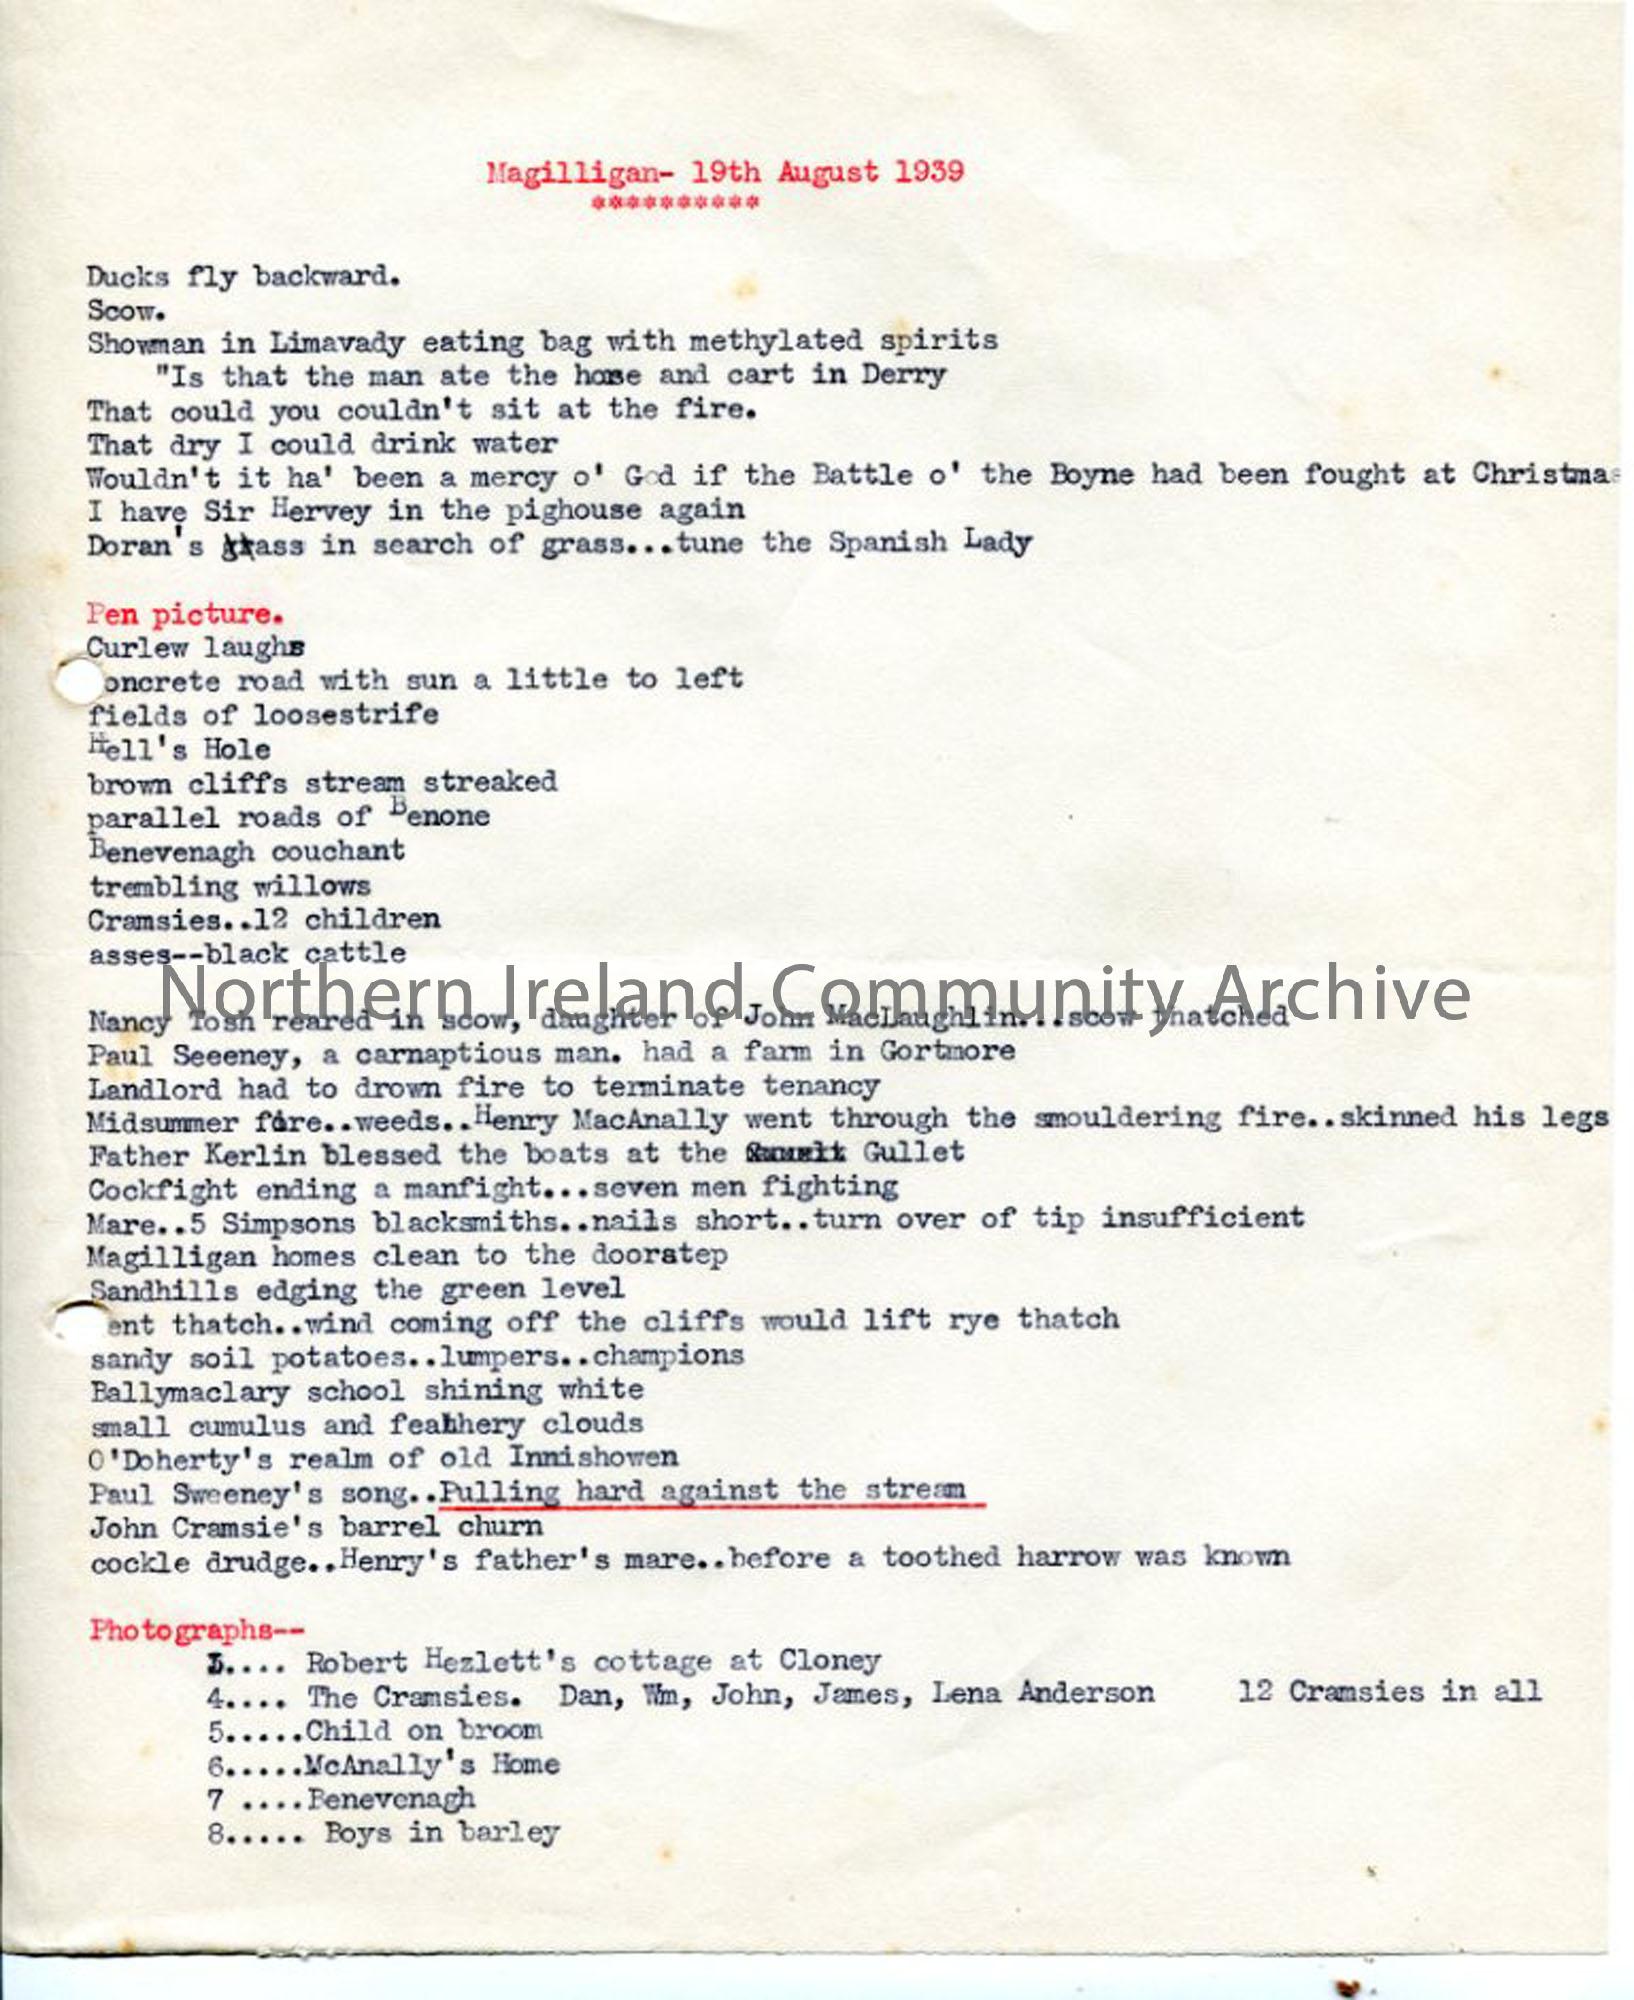 Typed notes- ‘Magilligan 19th August 1939’